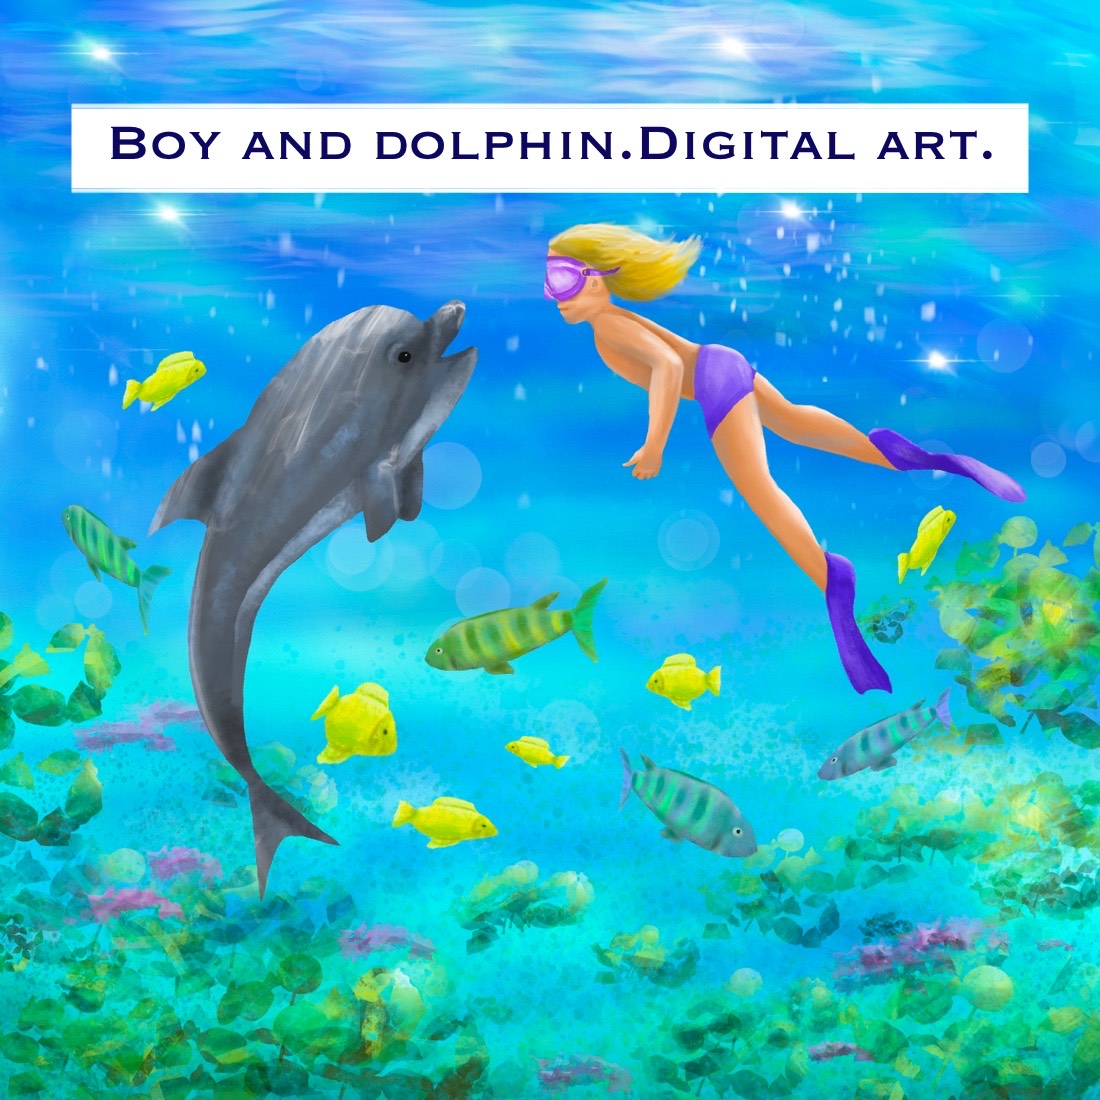 Boy and dolphinDigital art cover image.